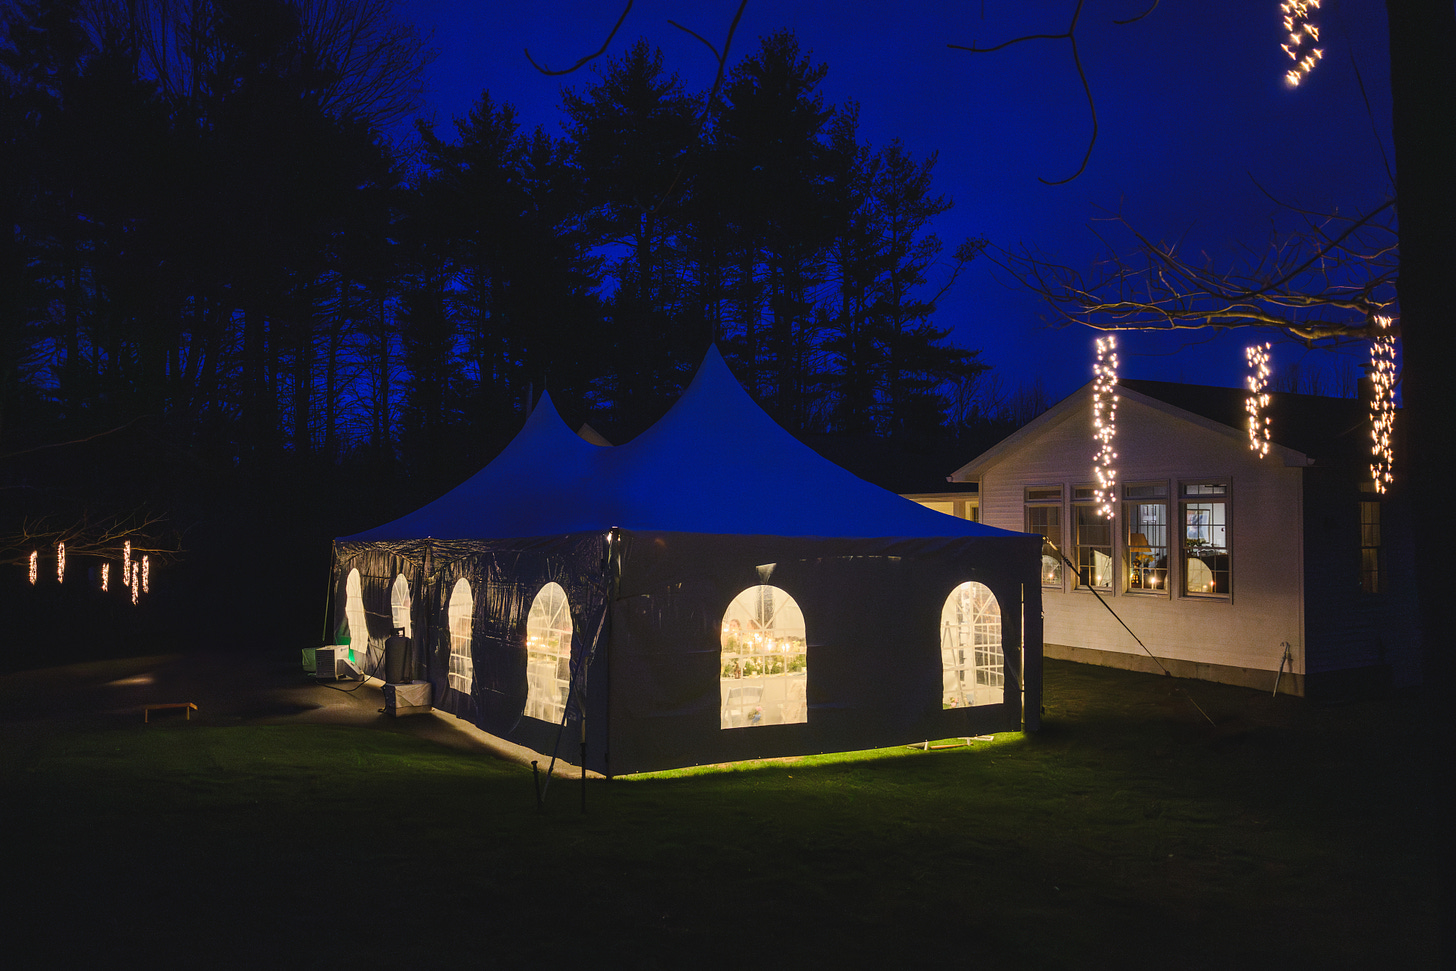 A nighttime photo of a wedding reception tent with hanging lights in the trees around it